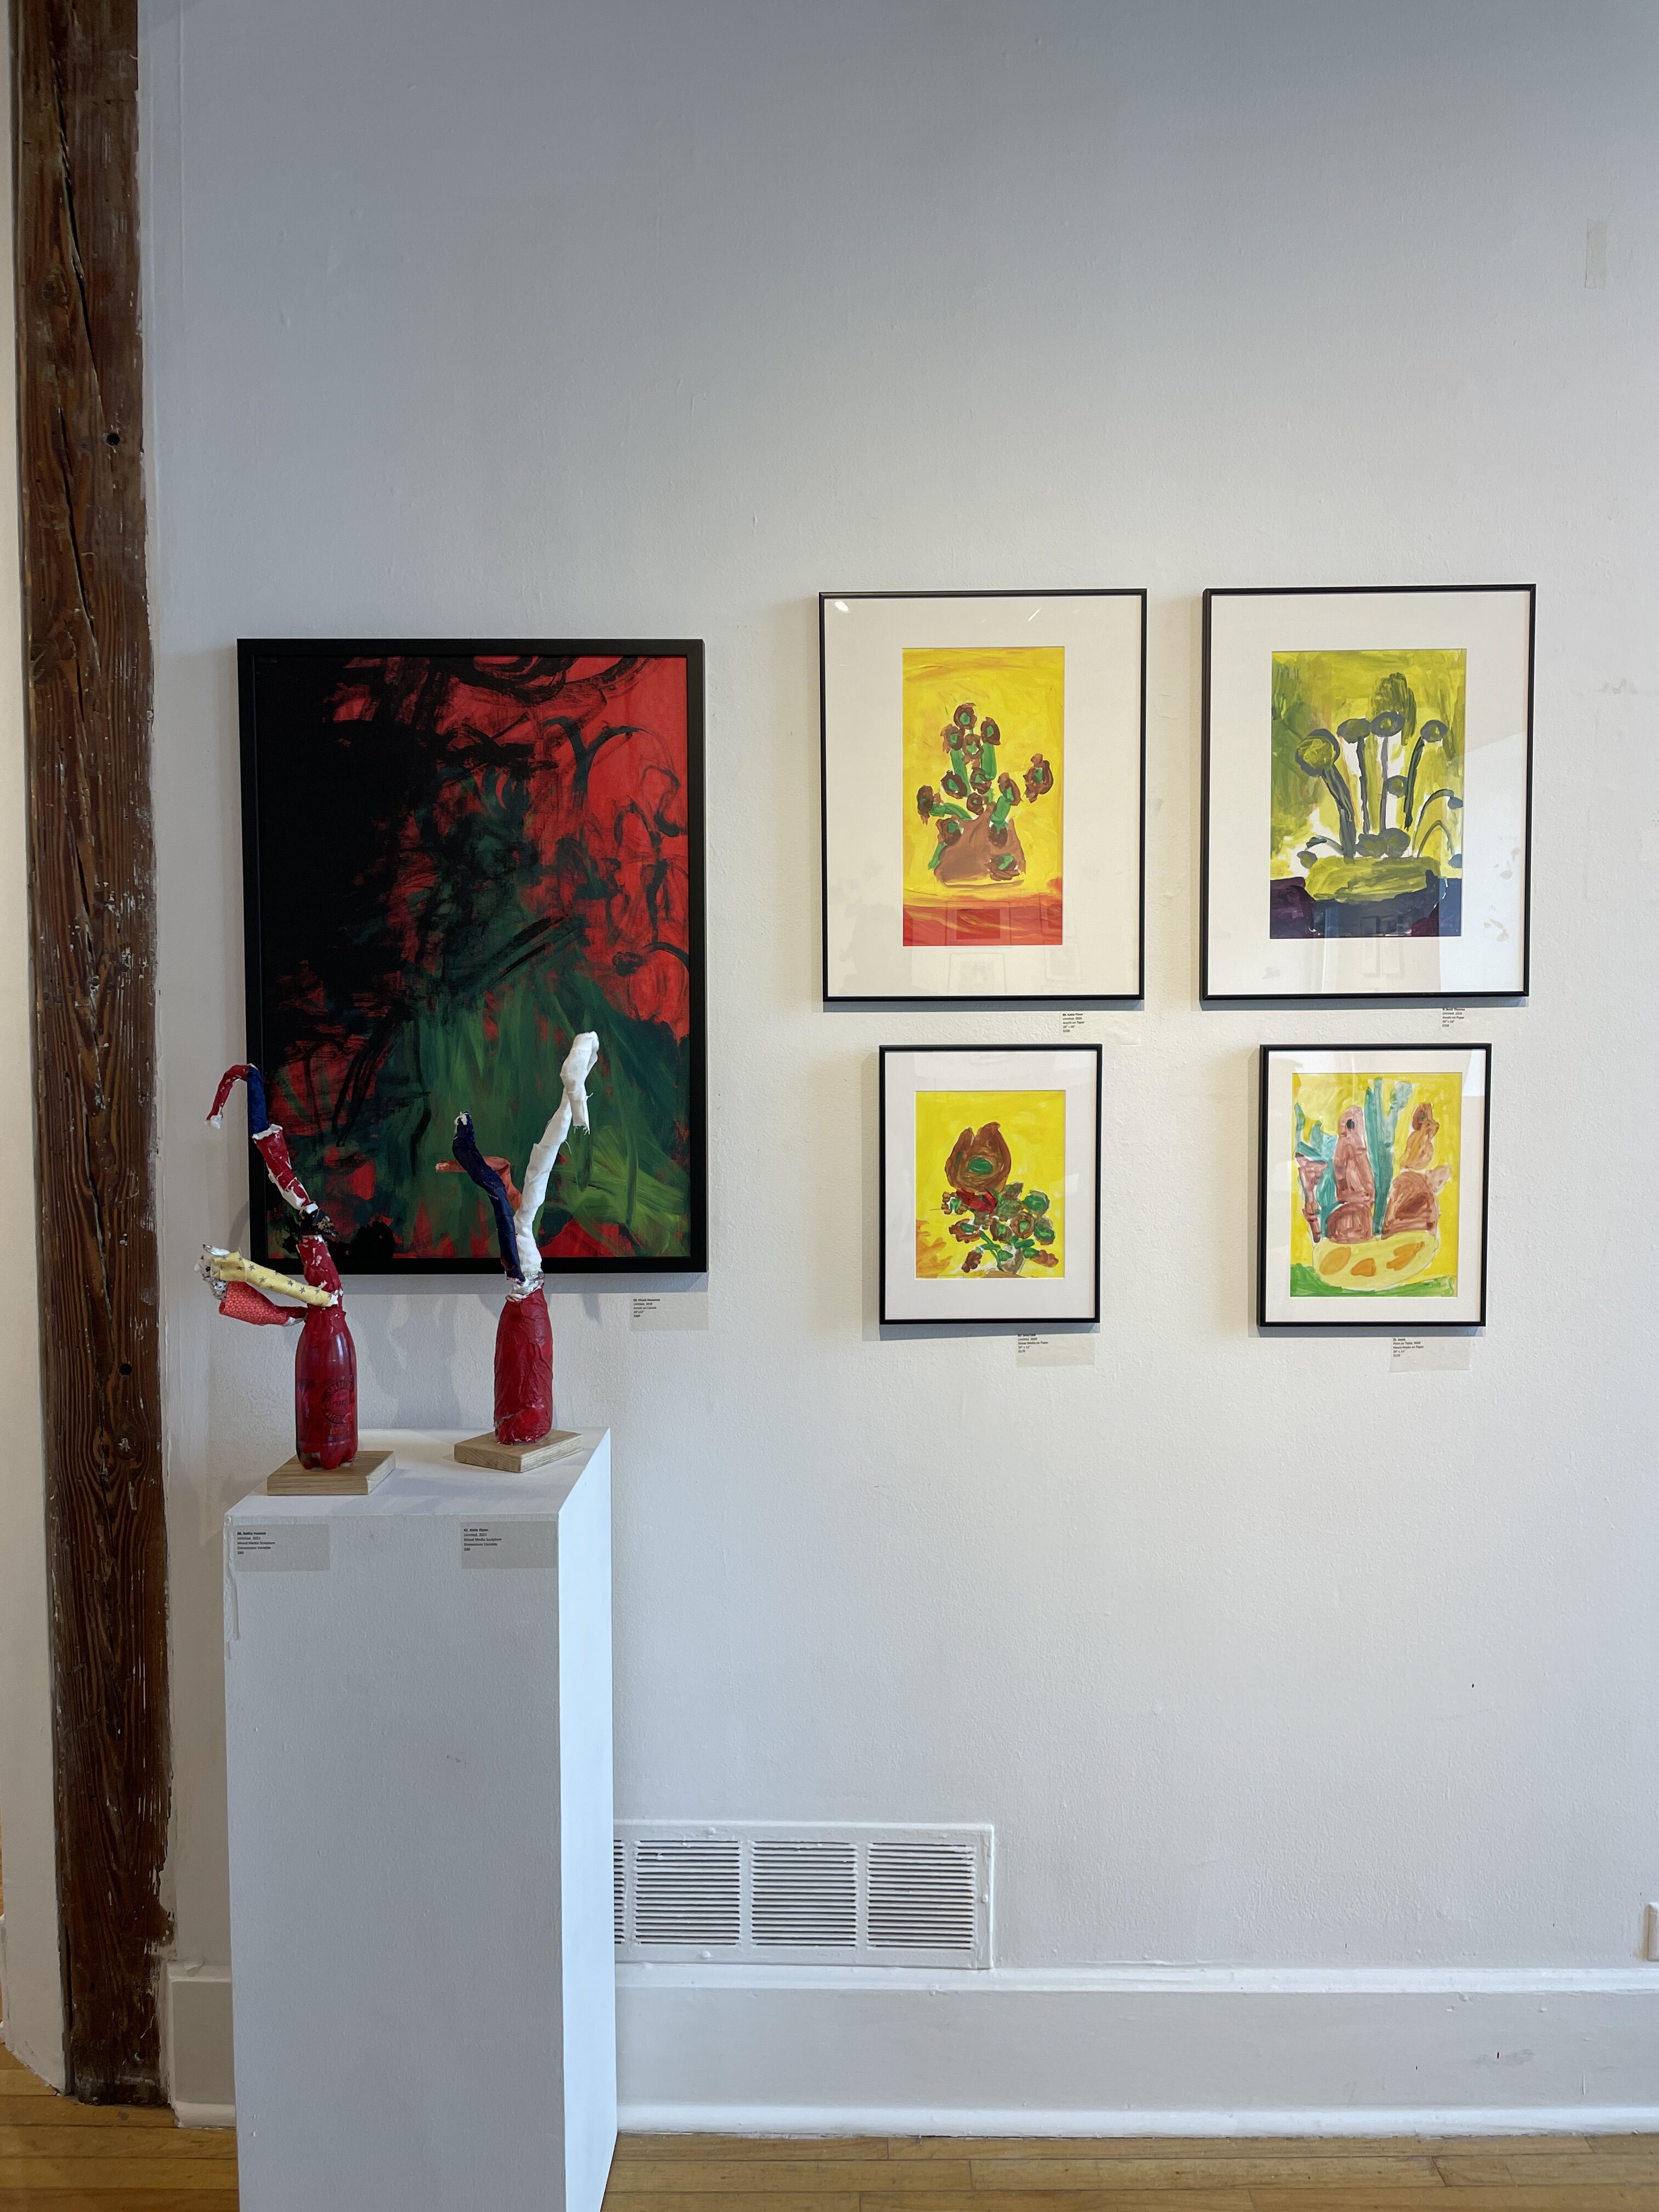 Gallery wall with a large red and green abstract painting alongside four small yellow and green paintings. Two sculptures sit on a white stand.